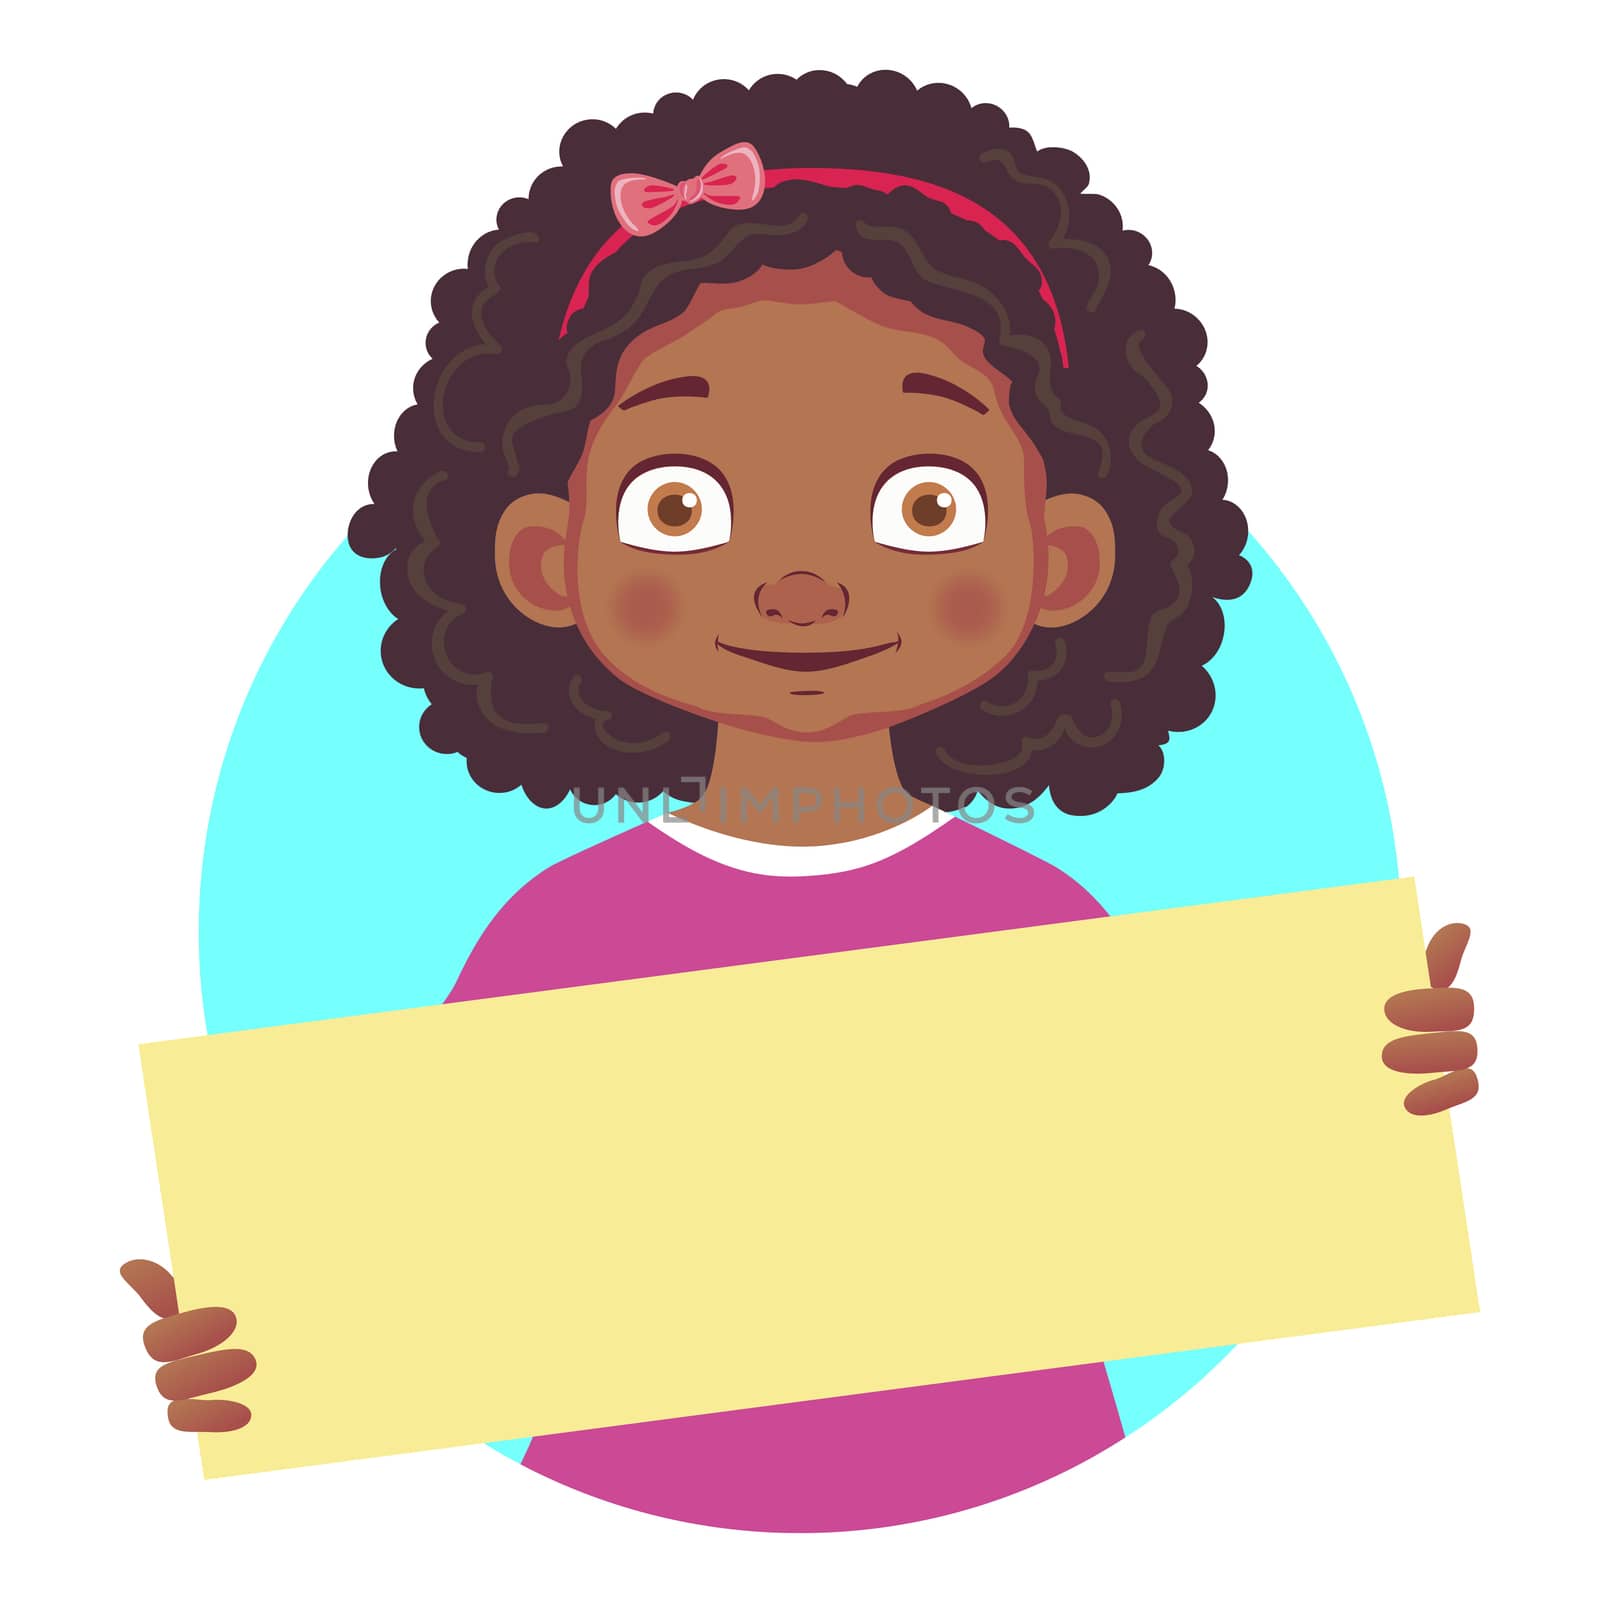 African or Afro-American girl holding blank poster. Blank message illustration. Hands holding blank paper